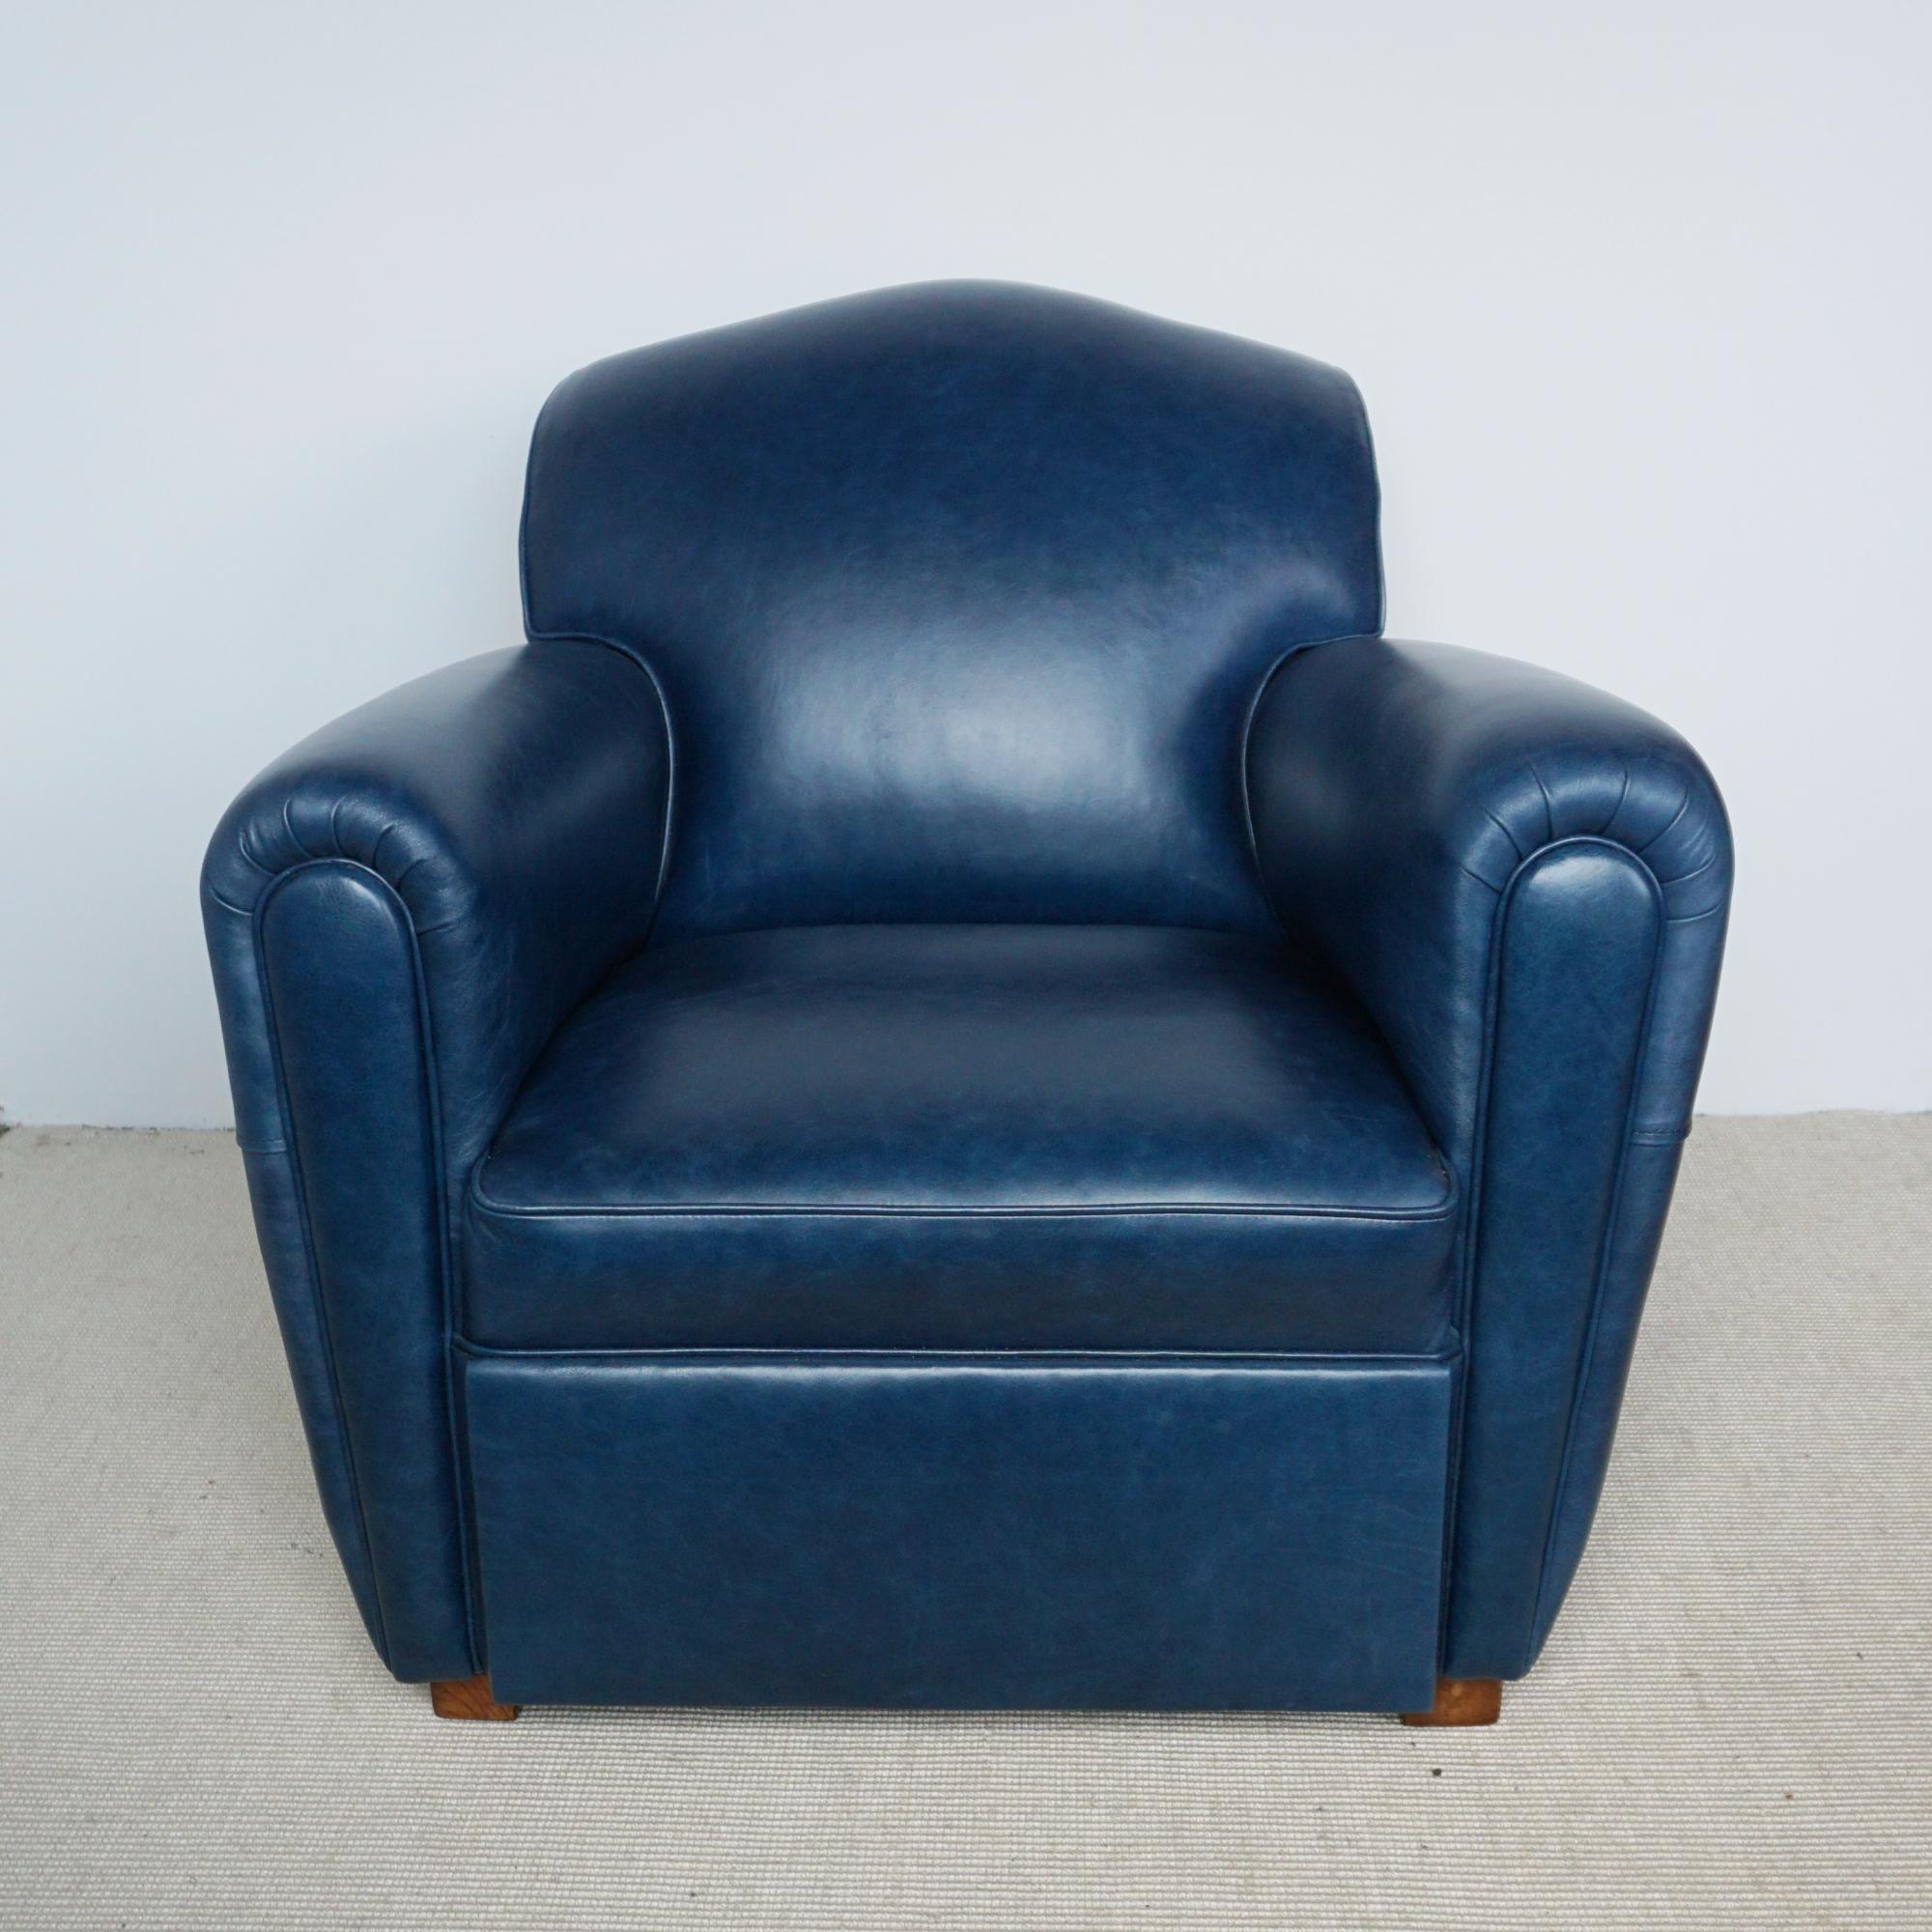 A pair of Art Deco moustache backed club armchairs. Re-upholstered in cobalt blue leather.

Dimensions: H 75cm W 85cm D 85cm Seat H 37cm W 42cm D 54cm

Origin: French

Date: Circa 1940

Item Number: 2003241

All of our furniture is extensively